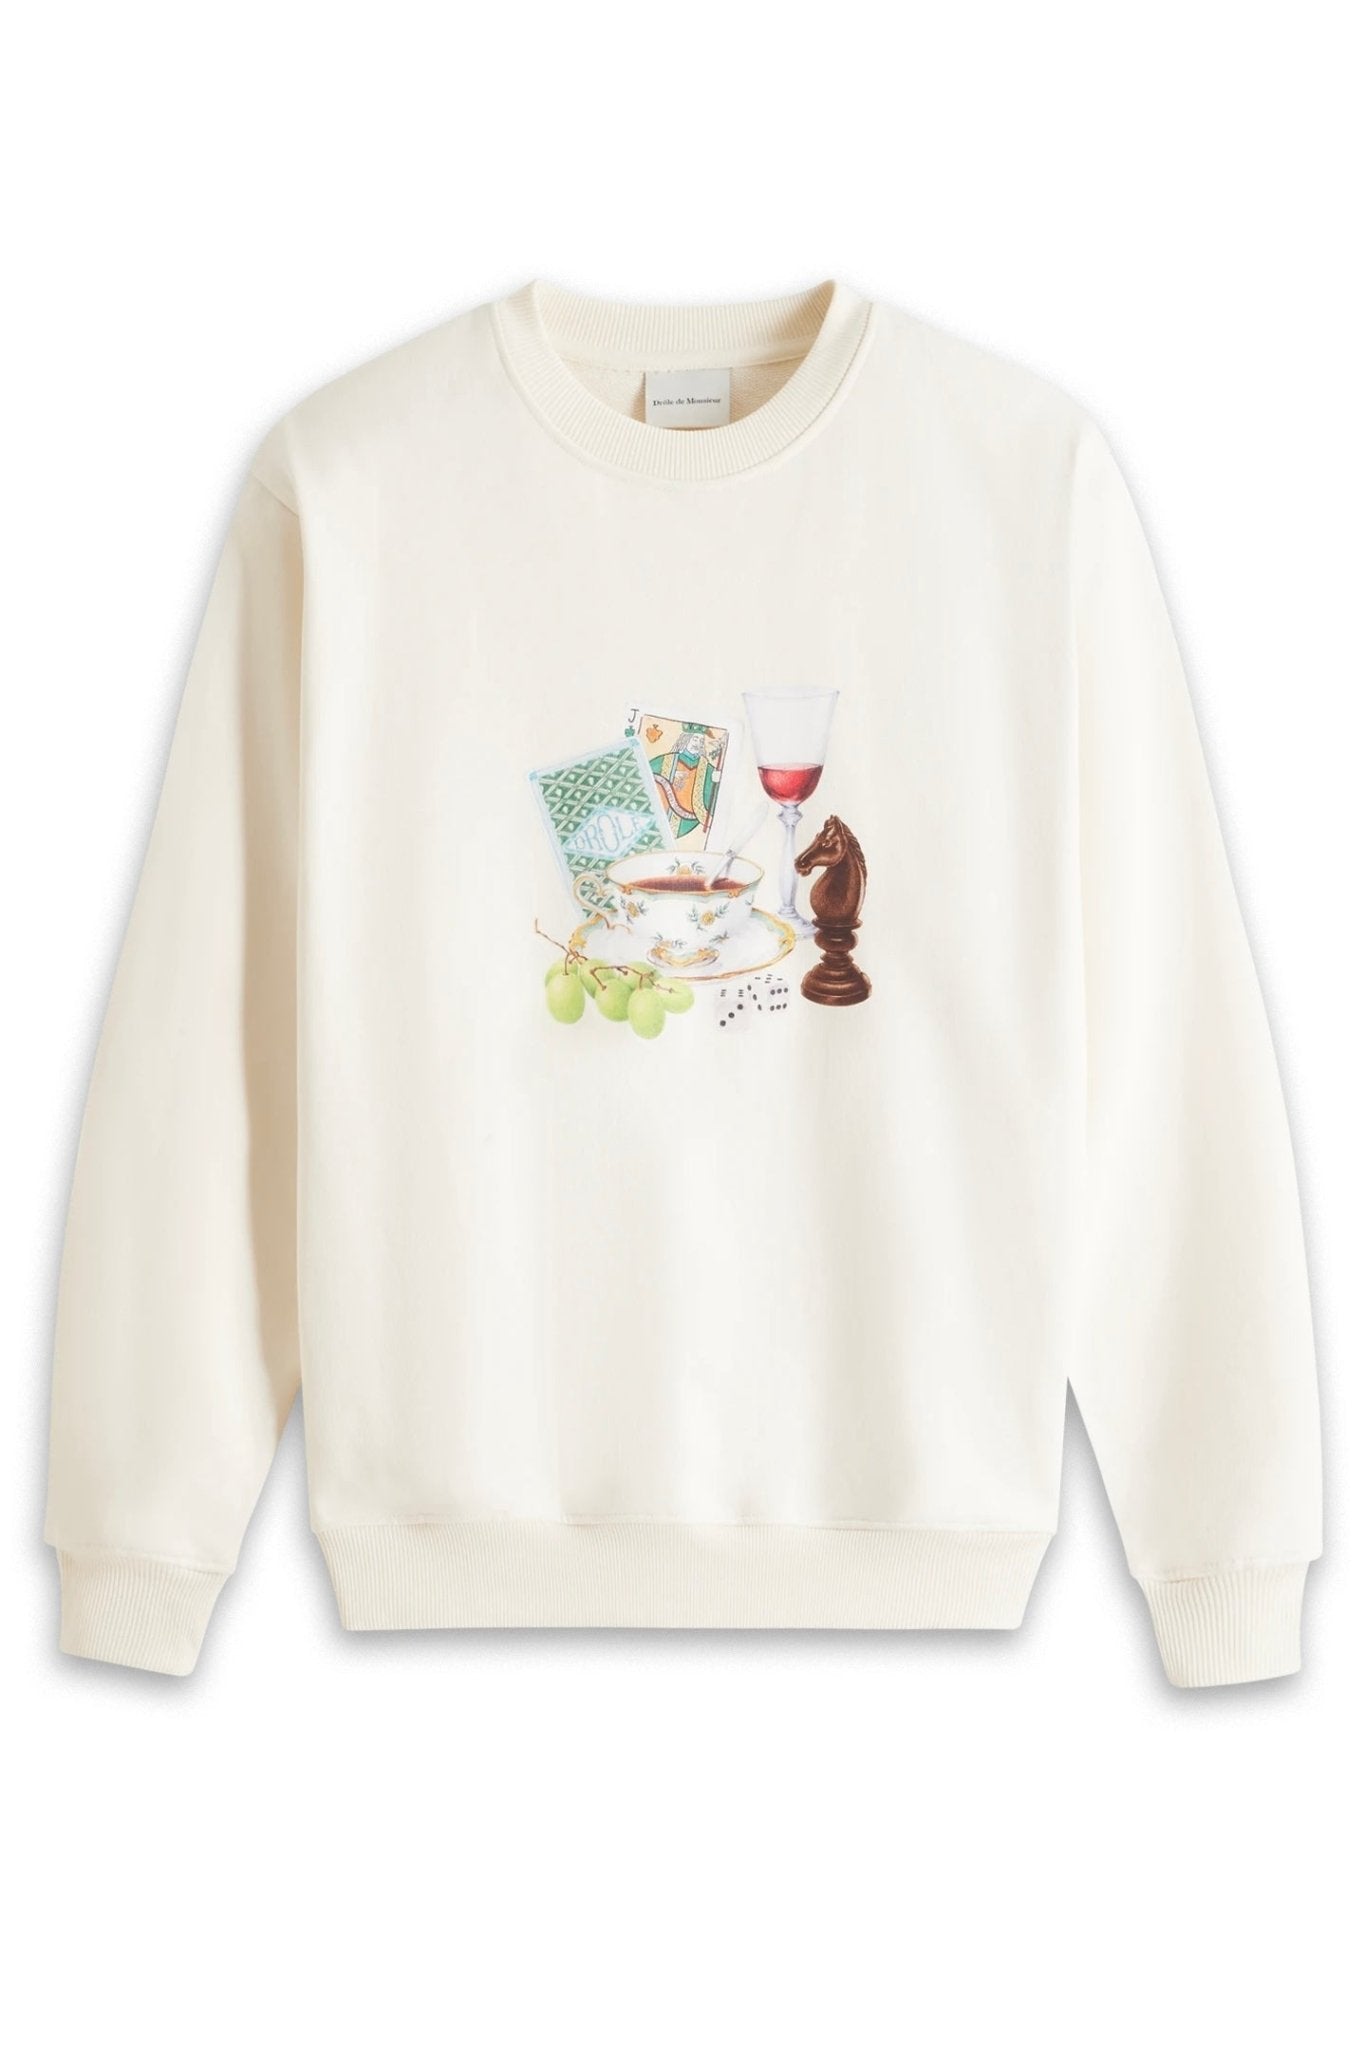 Cream-colored DROLE DE MONSIEUR D-SW144-CO127 LE SWEATSHIRT APRES-MIDI with a printed design featuring a glass of wine, a chess piece, playing cards and grapes.